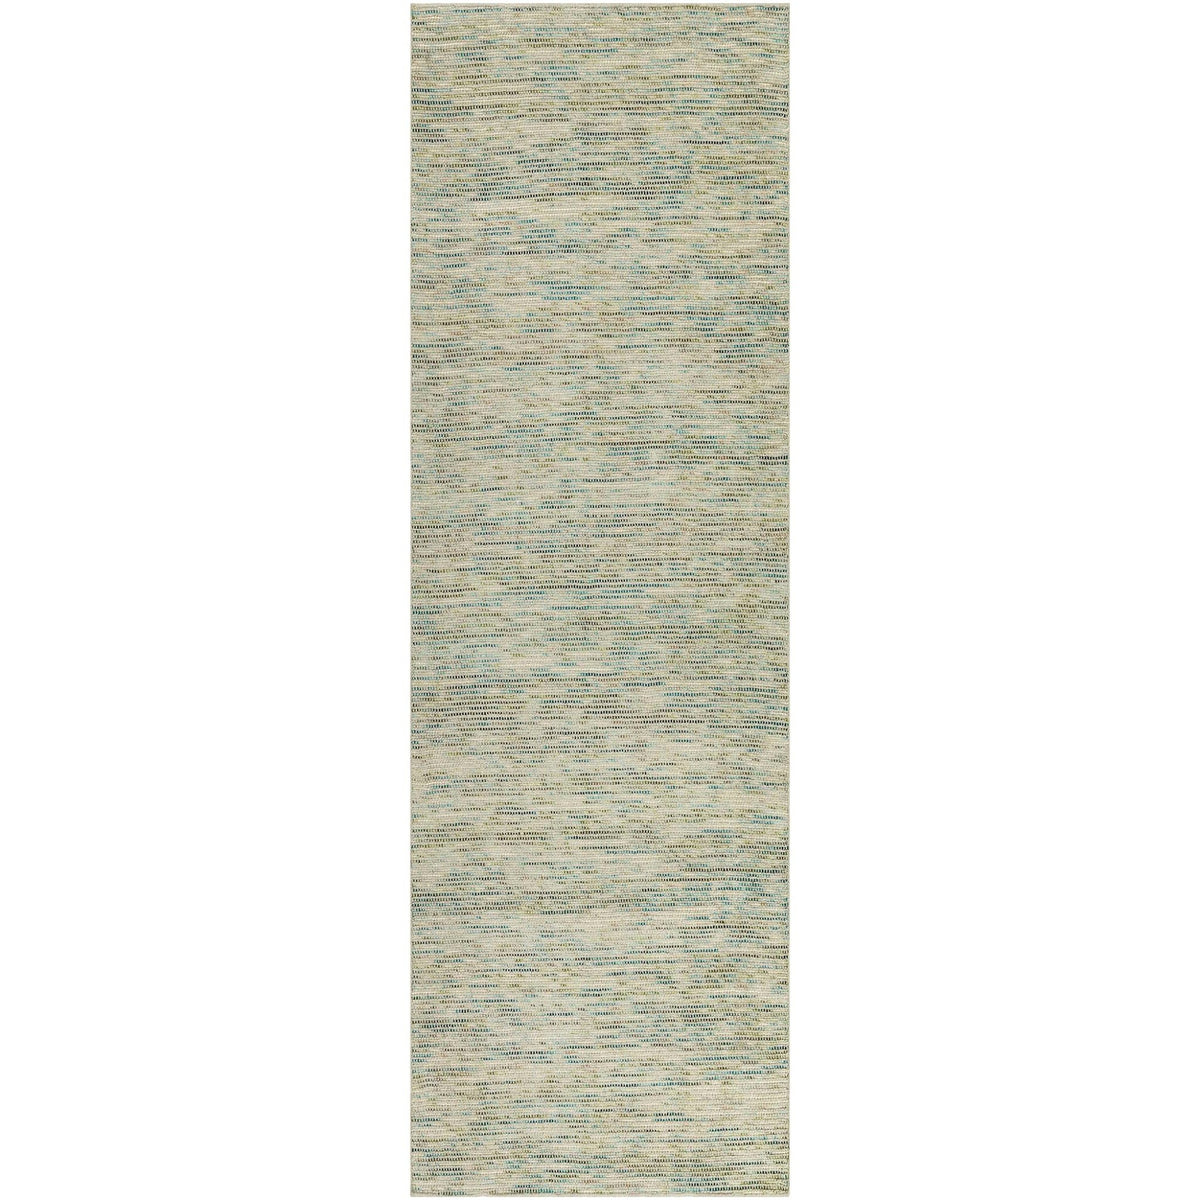 Zion ZN1 Taupe Rug - Rug & Home